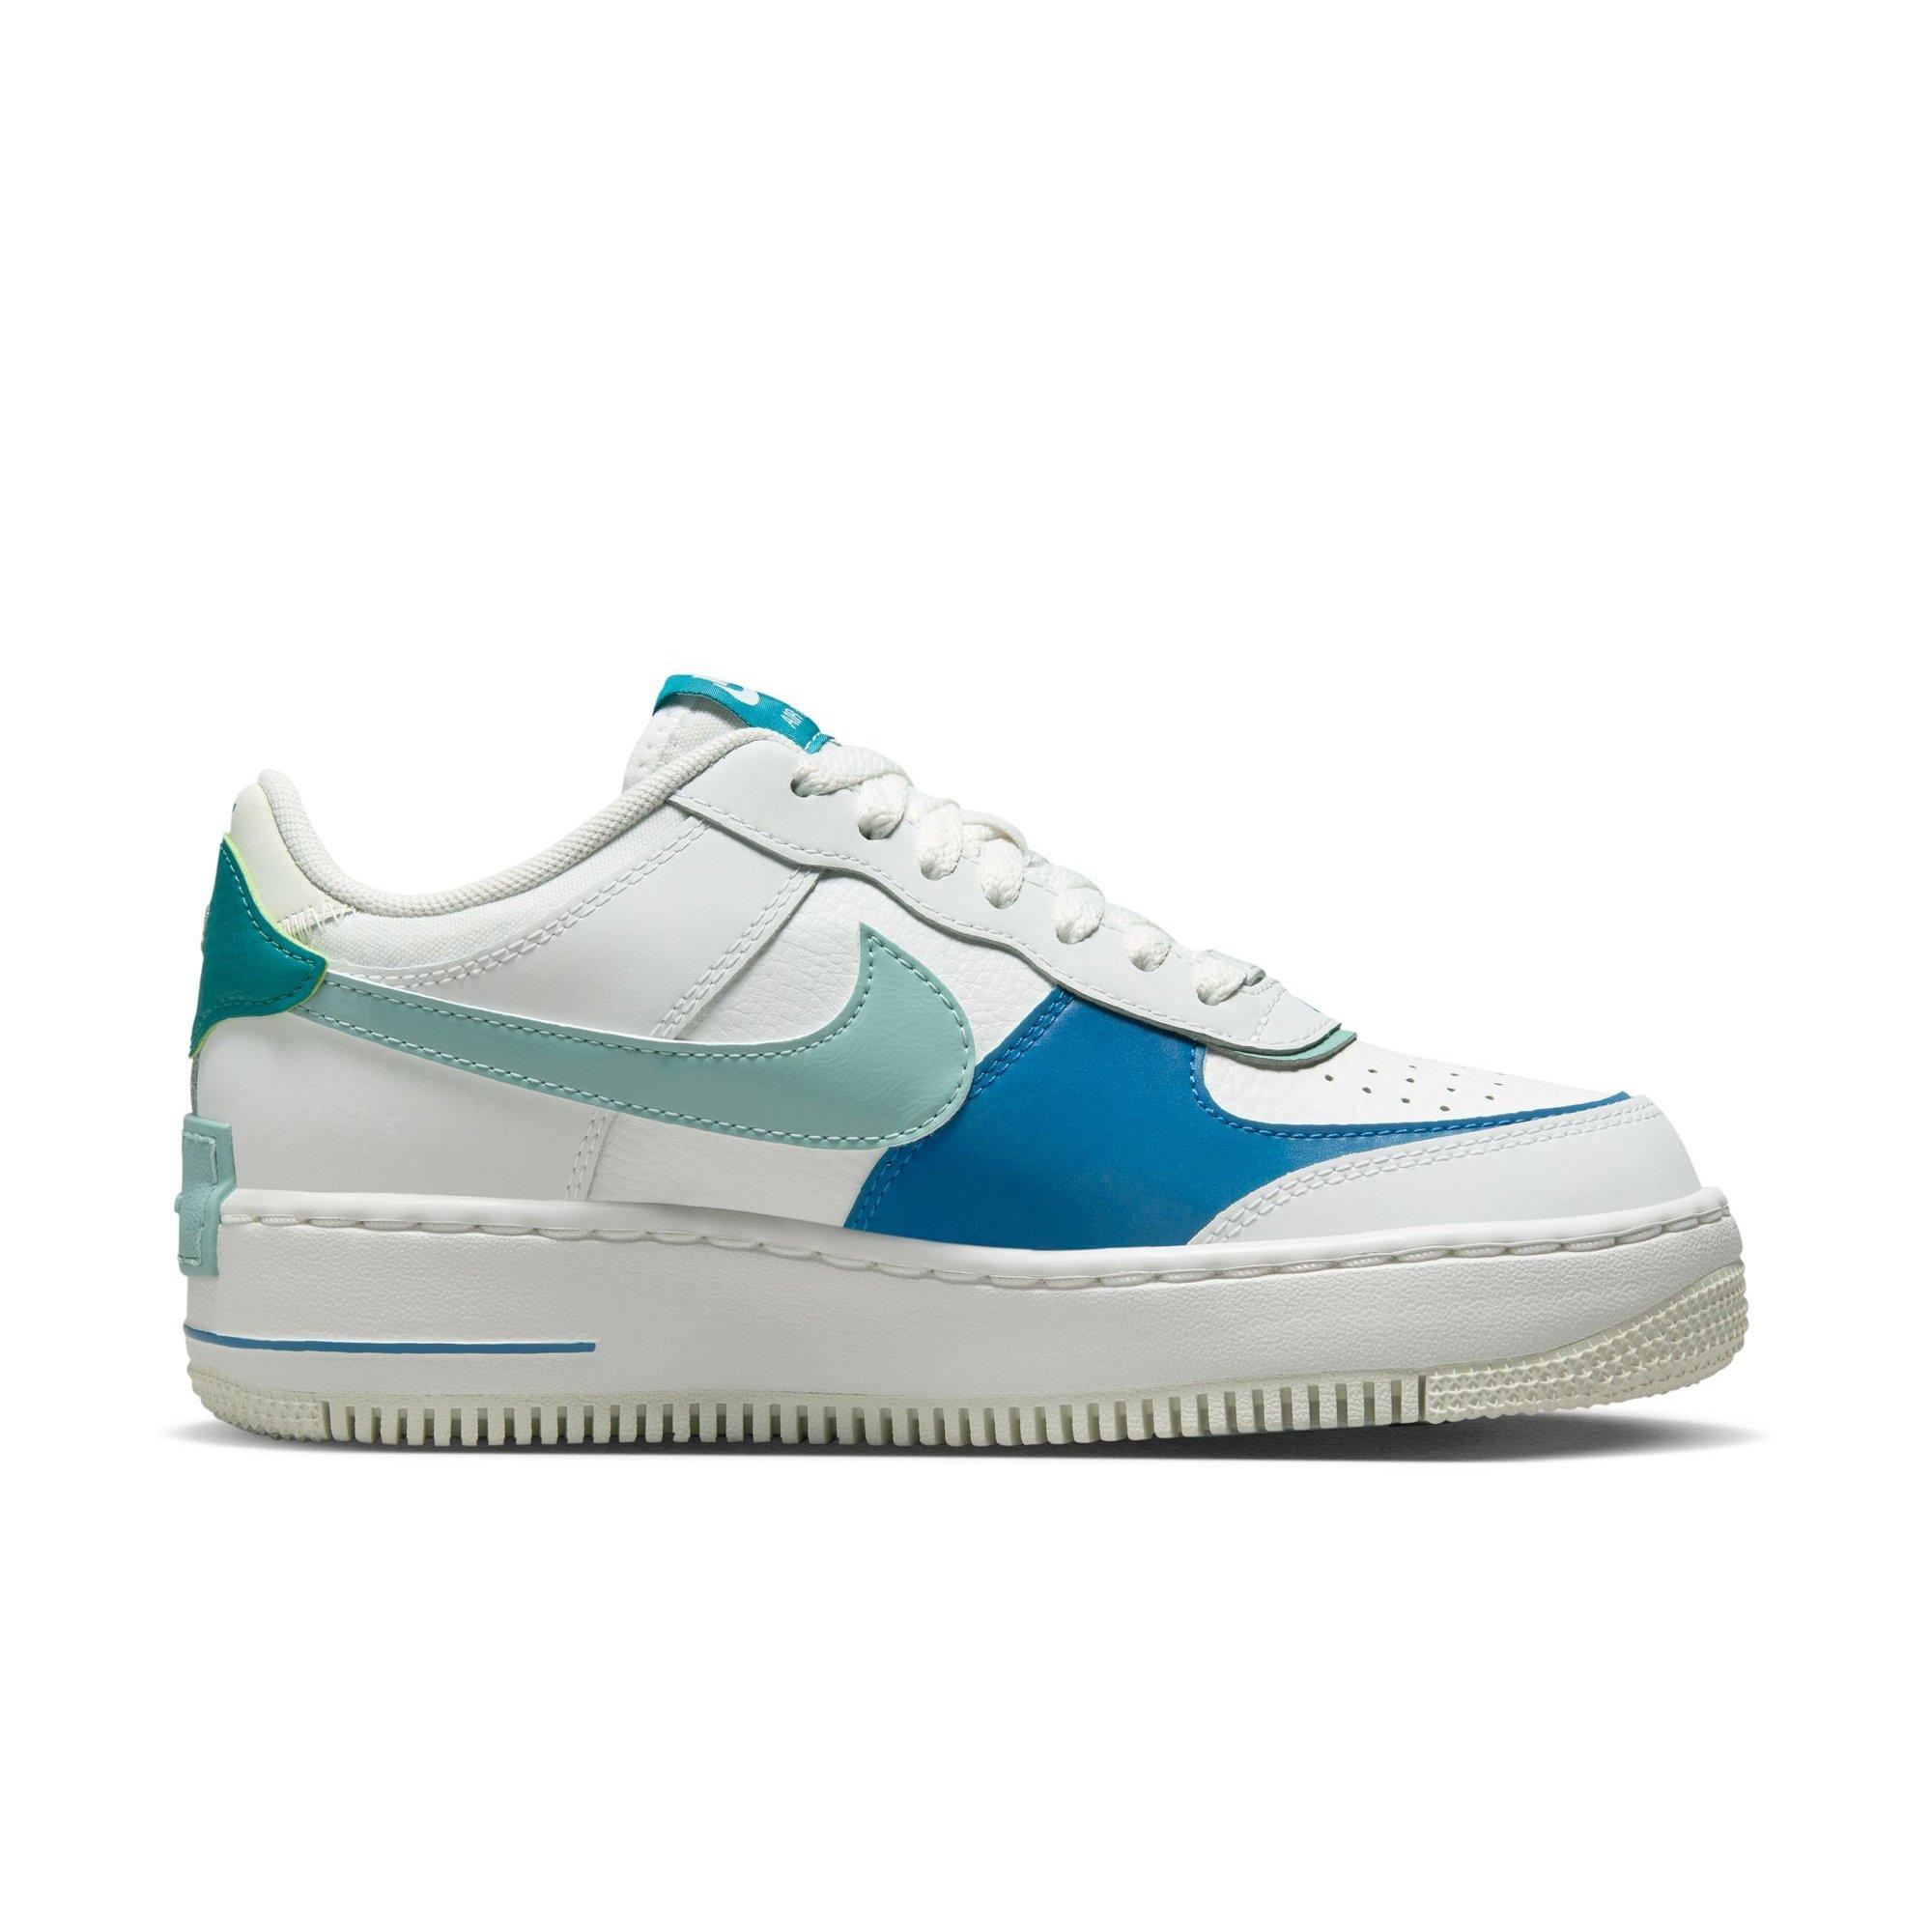 Nike Air Force 1 Shadow Summit White/Blue Women's Shoes, White/Green, Size: 8